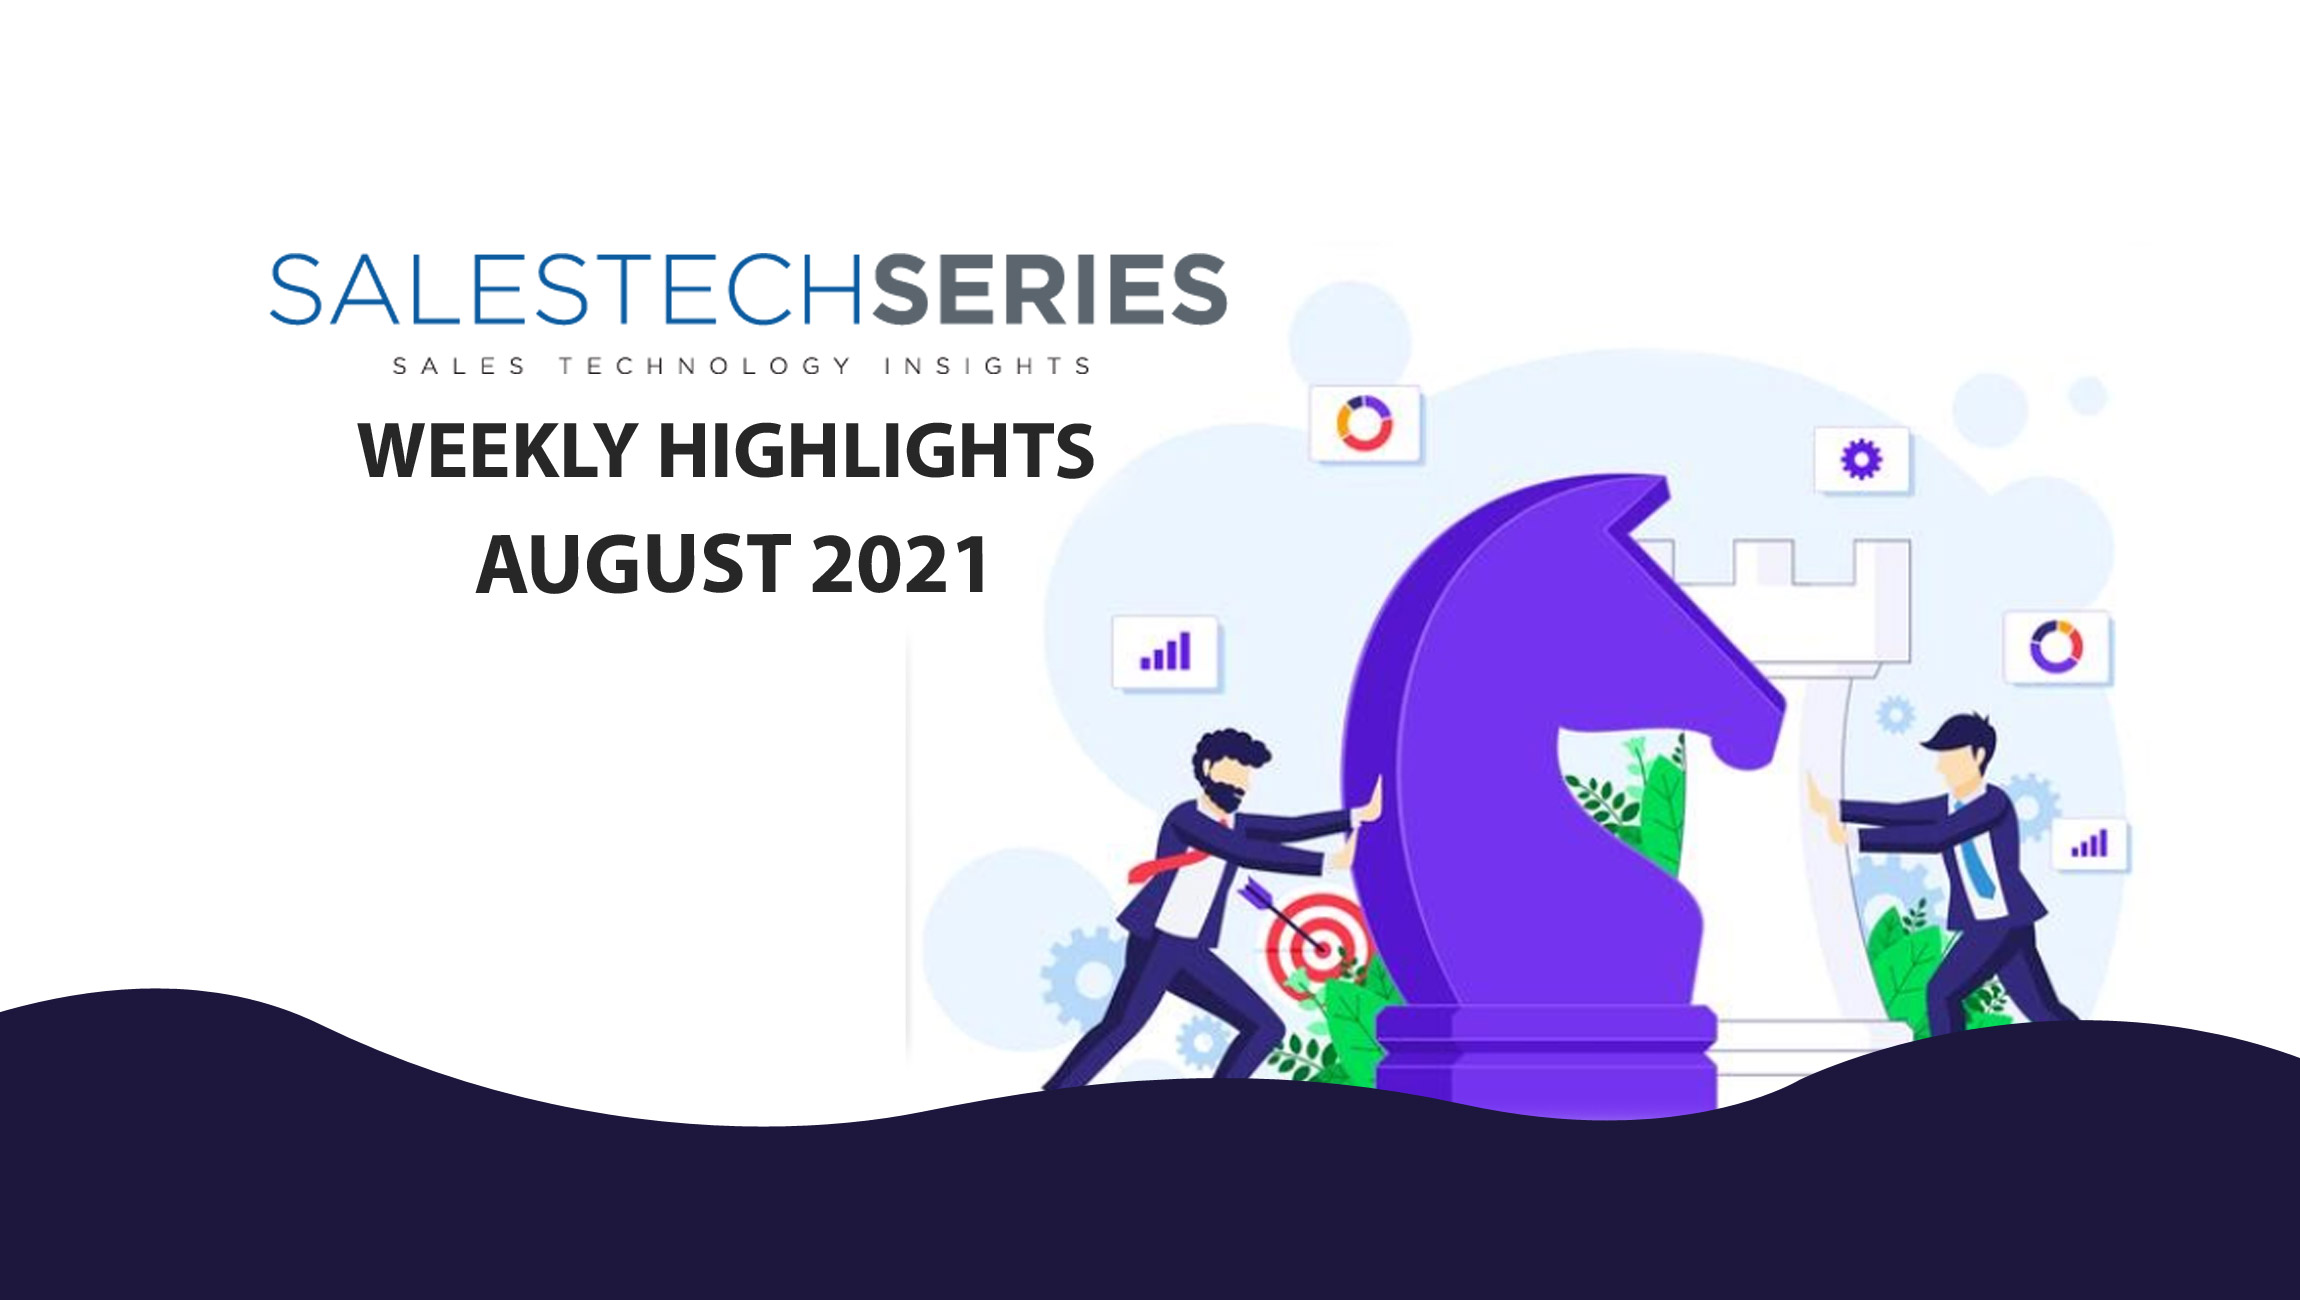 Sales Technology Highlights of The Week: Featuring Pipeliner, SalesLoft, Creatio, ChannelAdvisor and more!